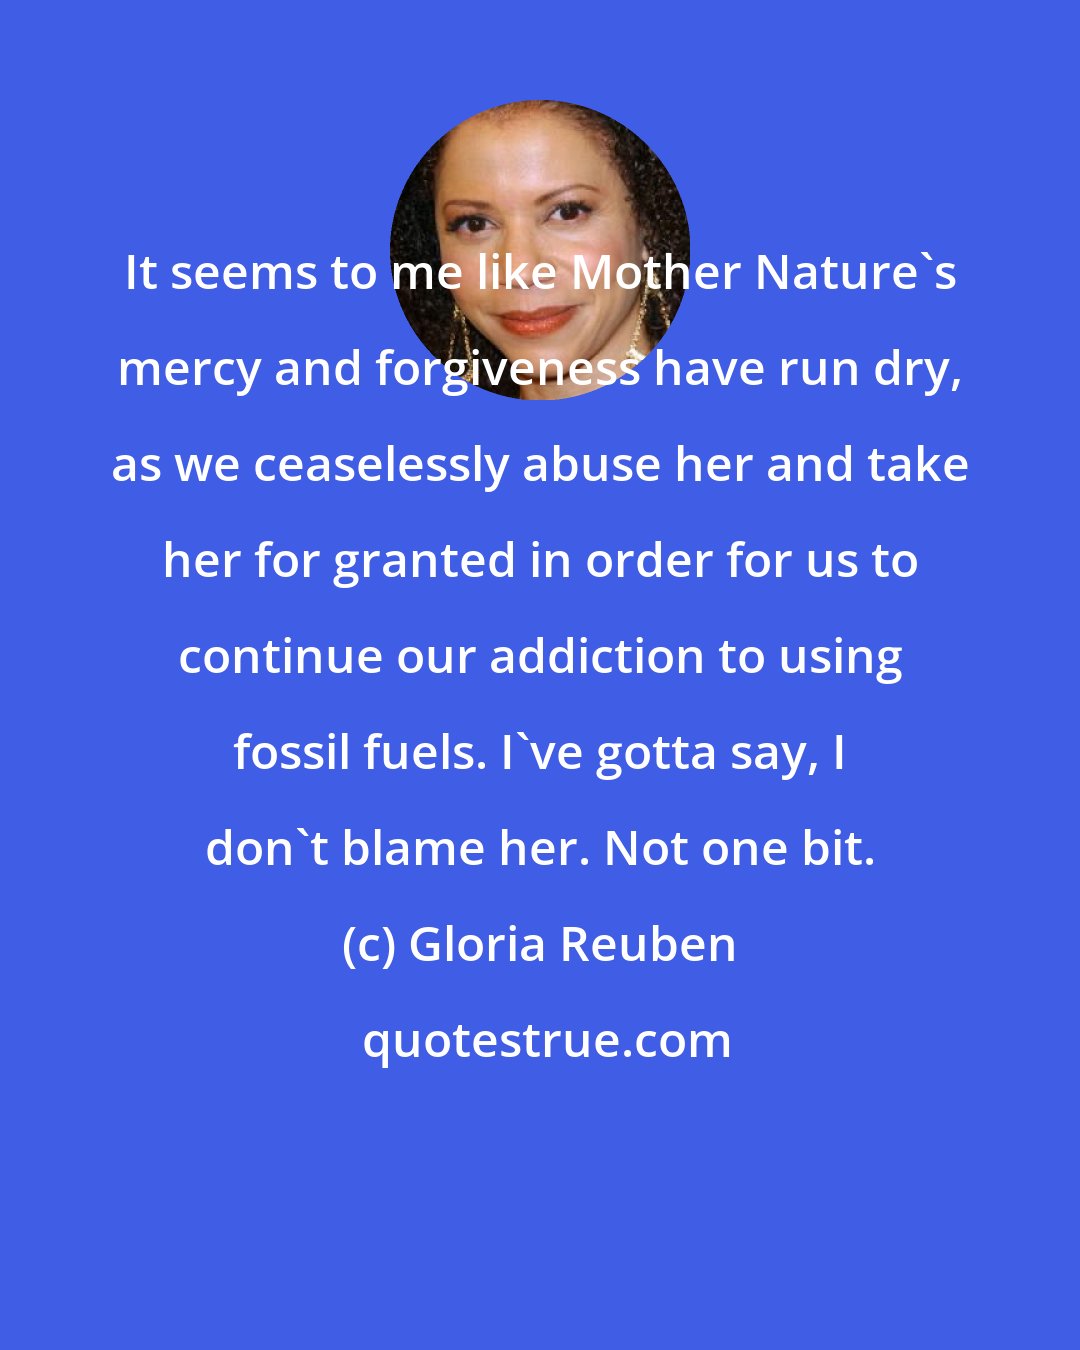 Gloria Reuben: It seems to me like Mother Nature's mercy and forgiveness have run dry, as we ceaselessly abuse her and take her for granted in order for us to continue our addiction to using fossil fuels. I've gotta say, I don't blame her. Not one bit.